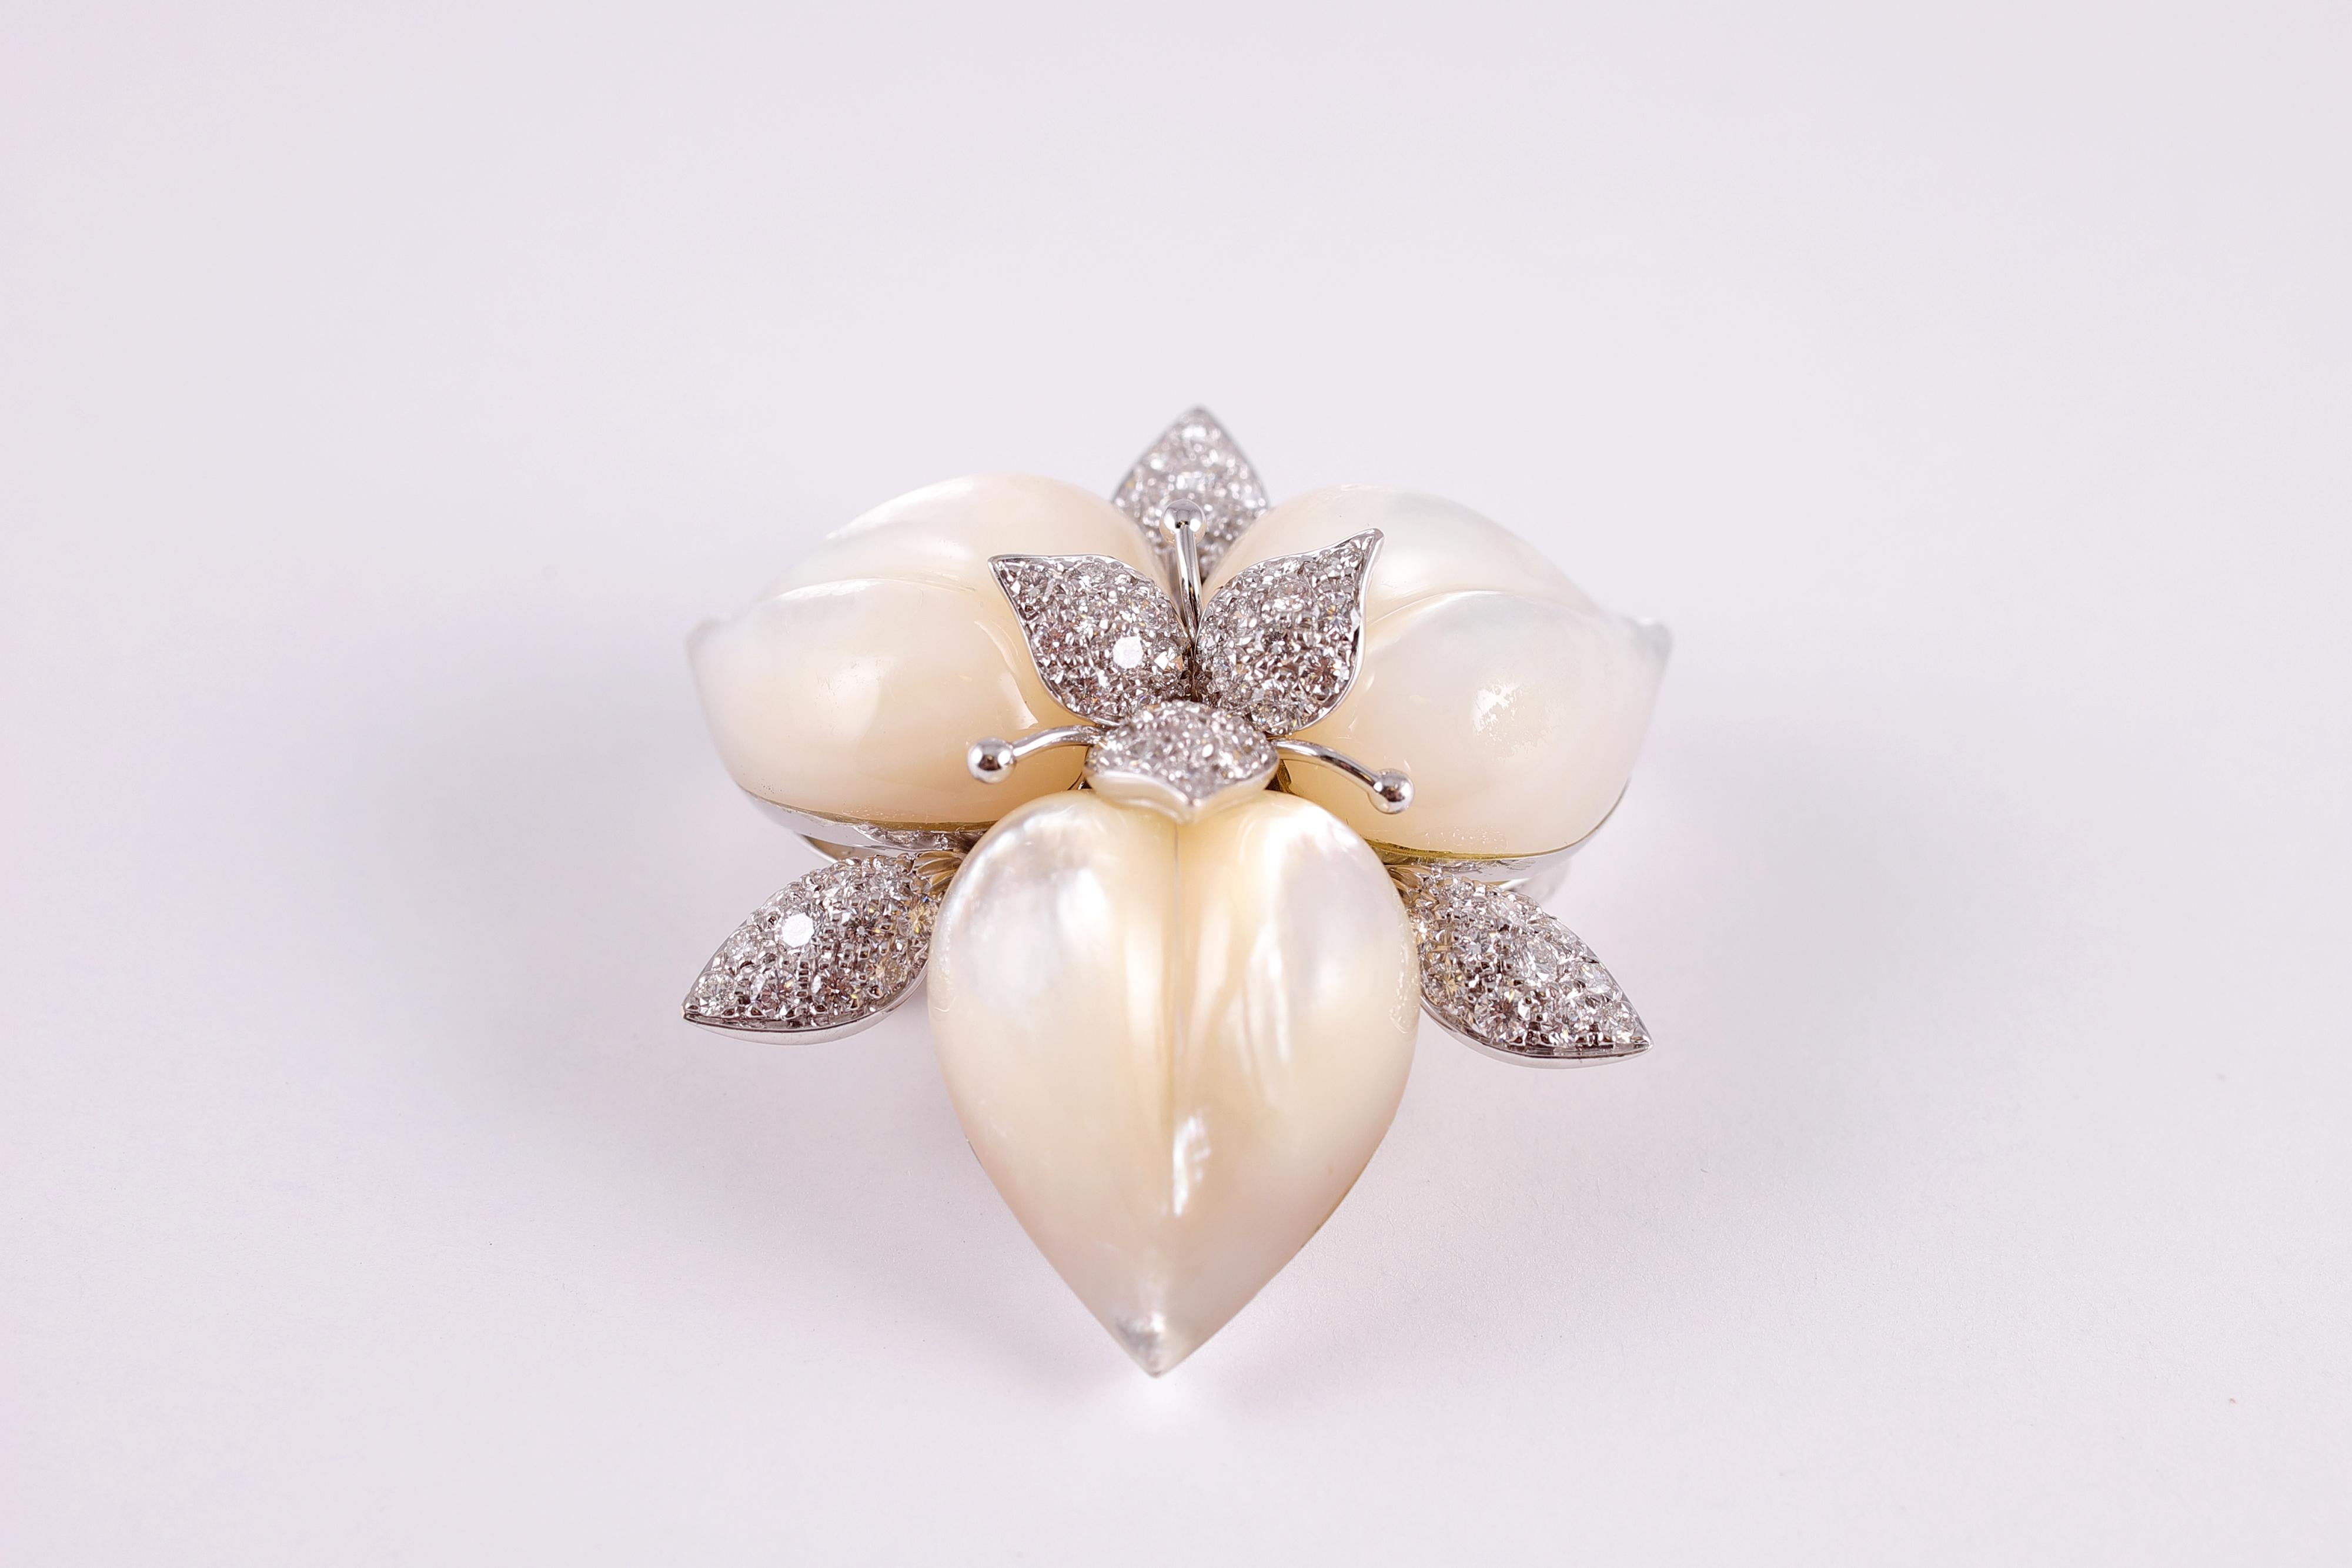 Three carved mother-of-pearl petals are enhanced by diamond leaves, and a diamond foliate cluster center, all in 18 karat white gold.  Total stated weight is approximately 1.91 carats. Secured with a double stem pin and plunger clasp. Purchased from